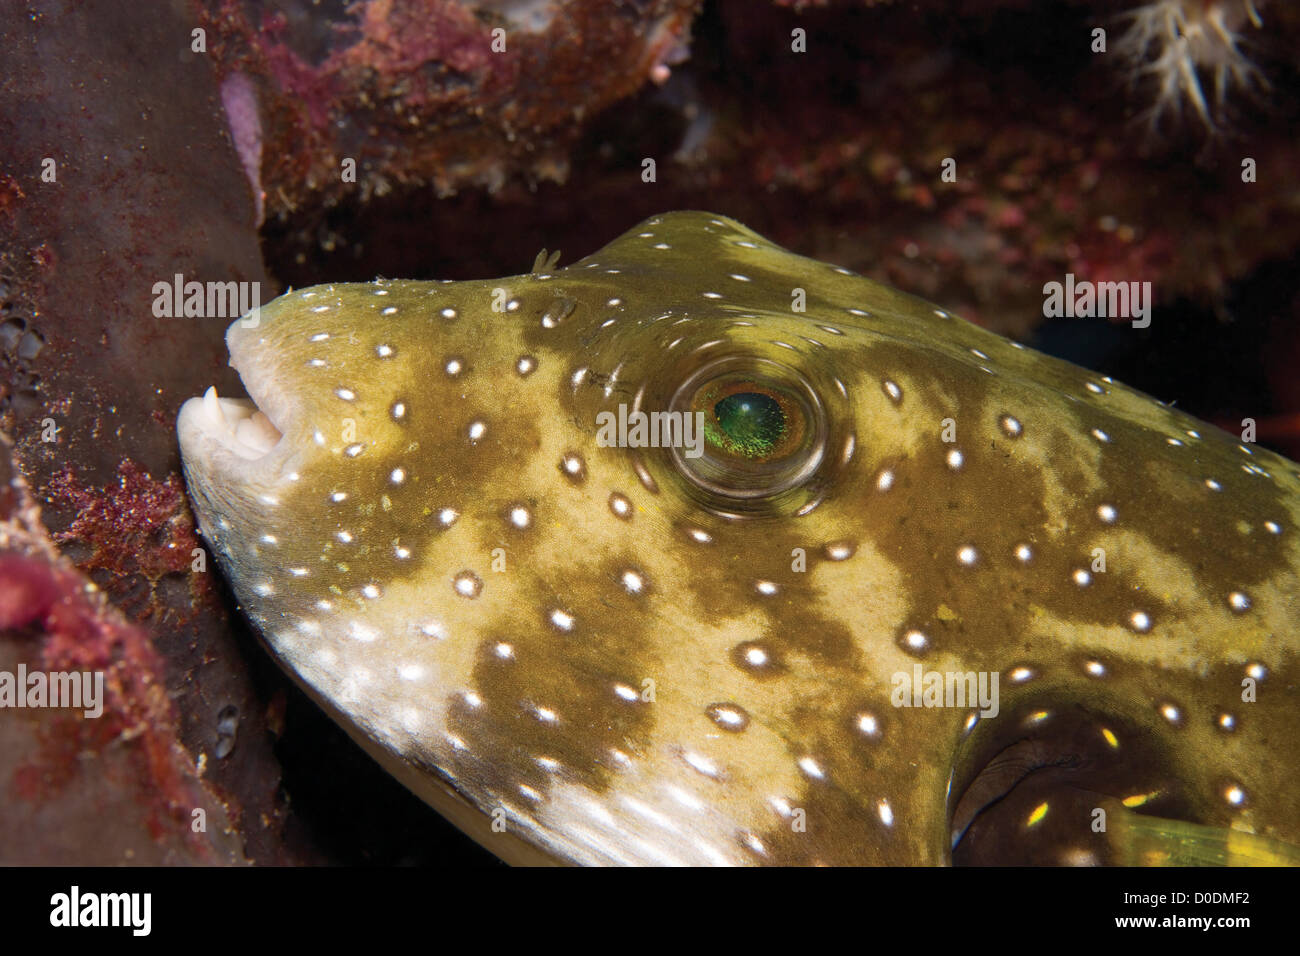 Close-up of the Opalescent Eye and Face of Whitespotted Puffer Stock Photo